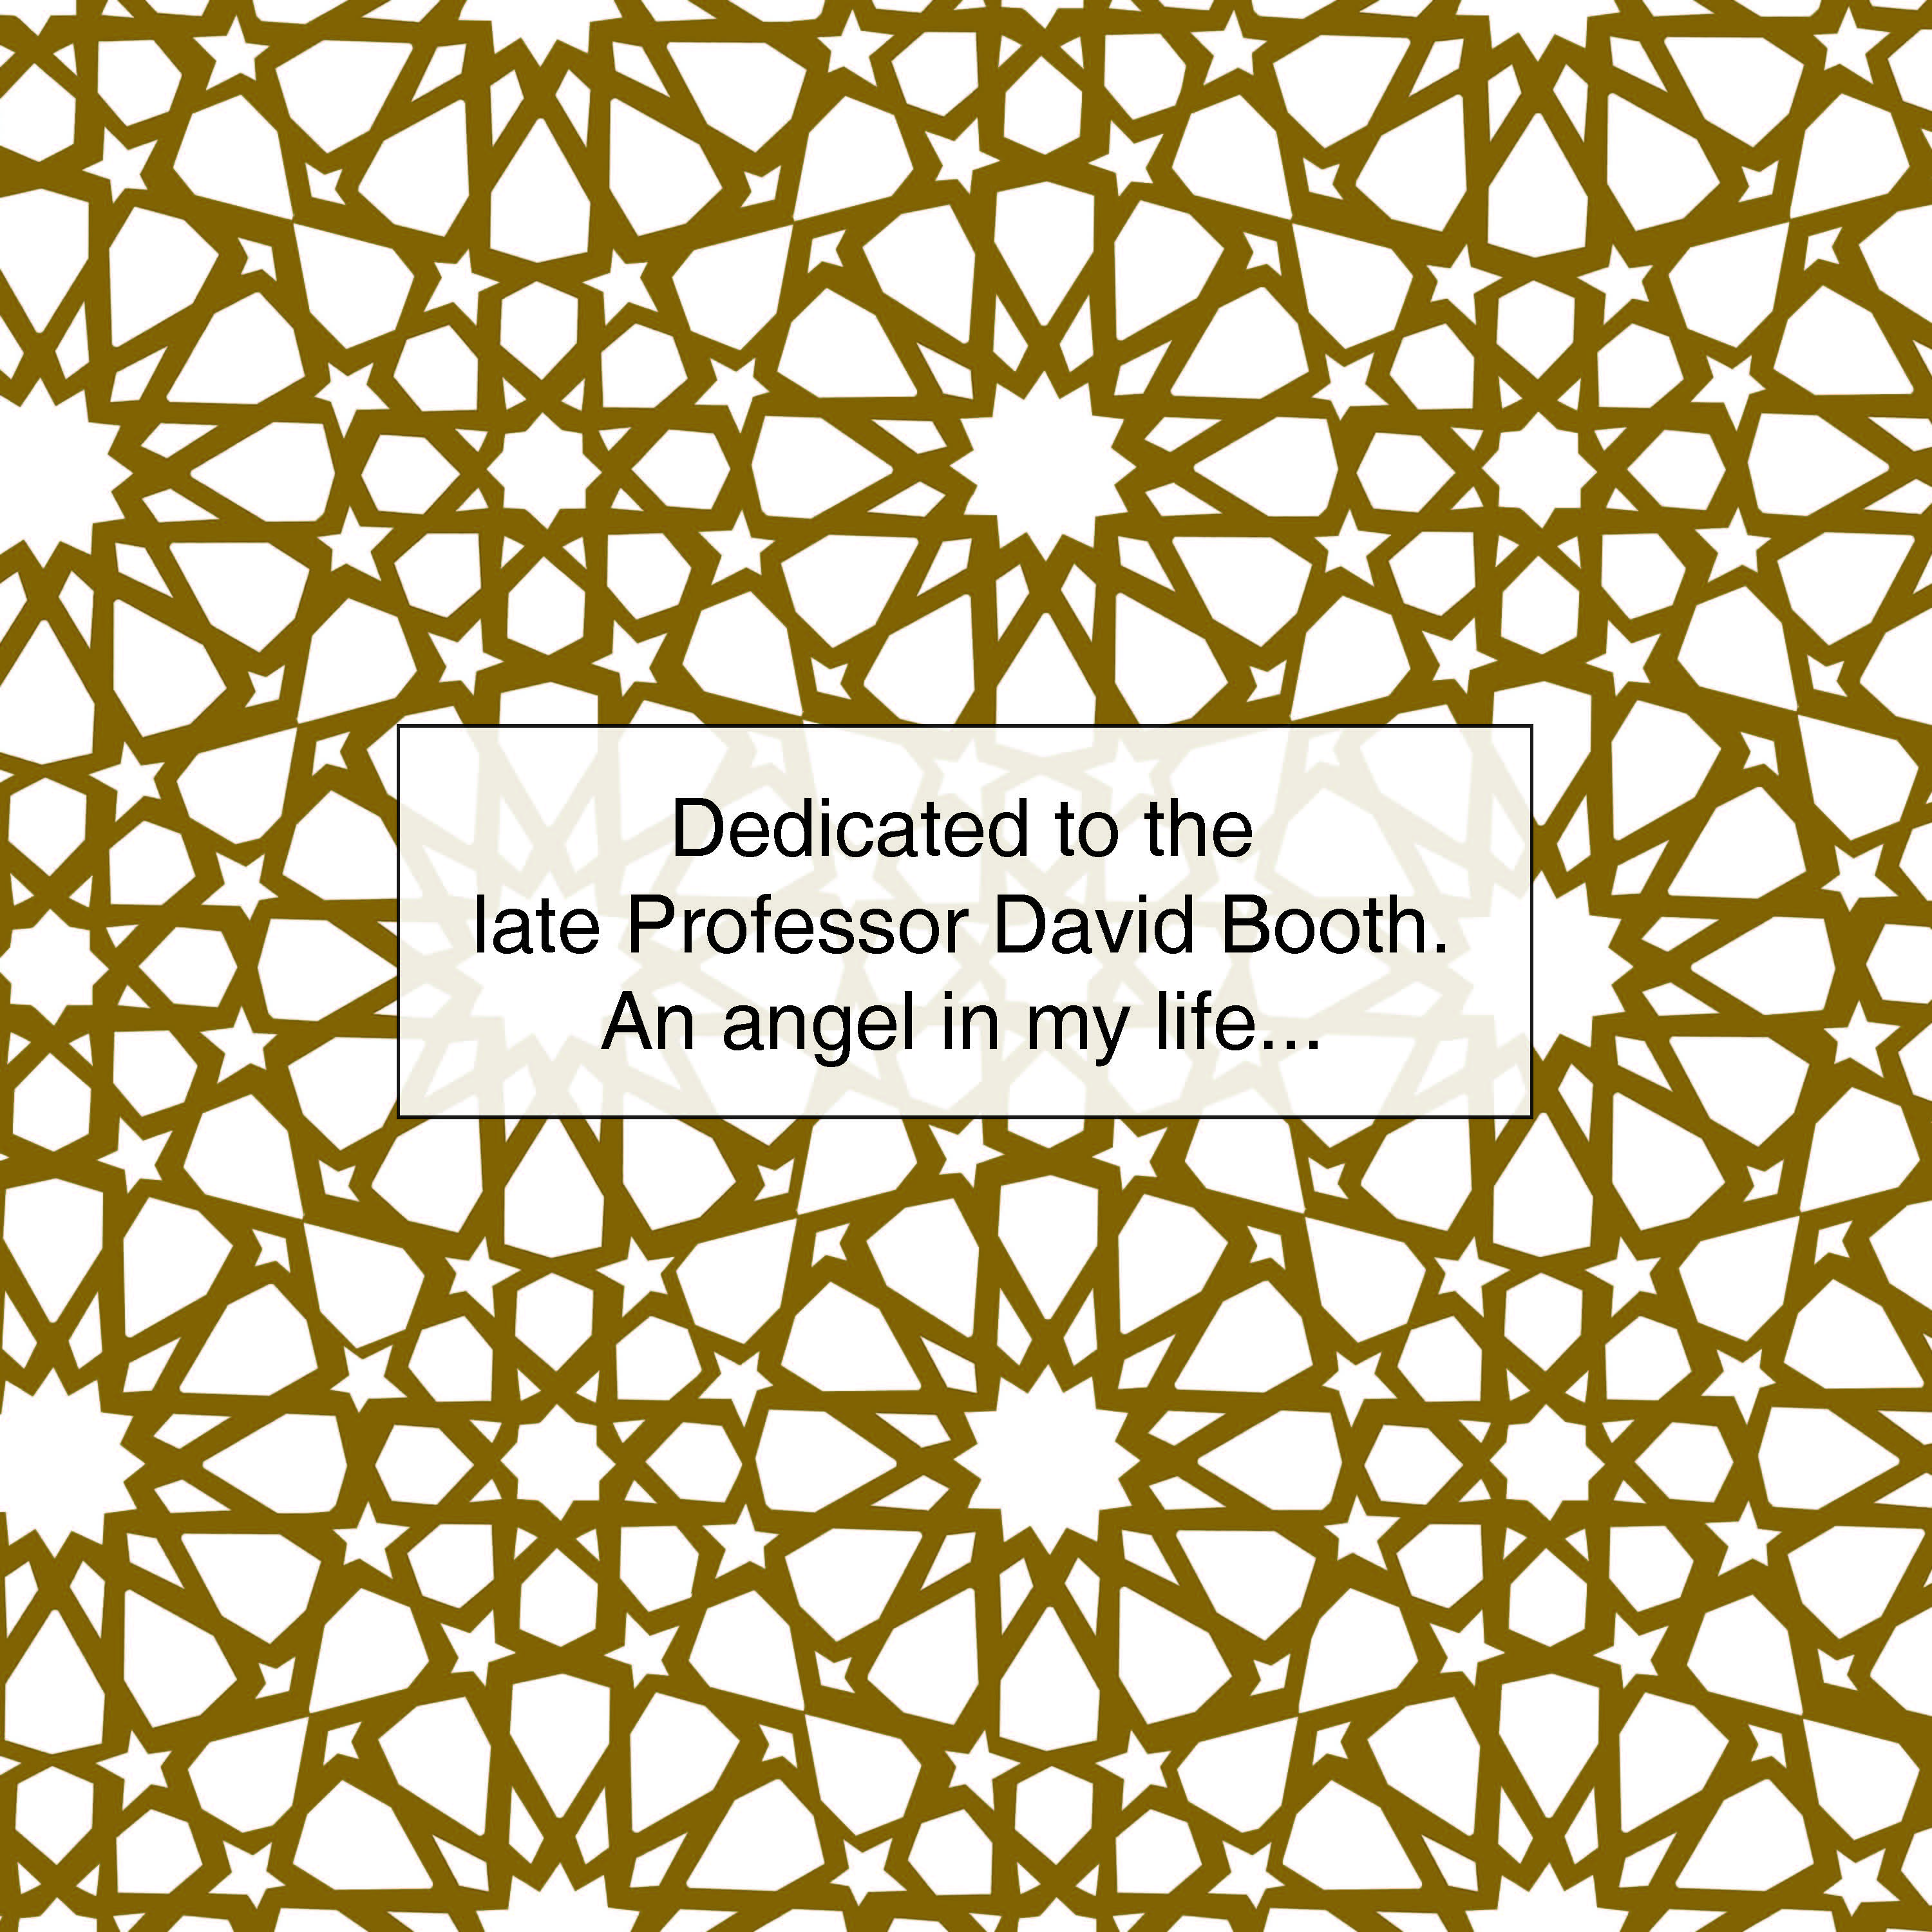 The Tyer of Ties is dedicated to late Professor David Booth